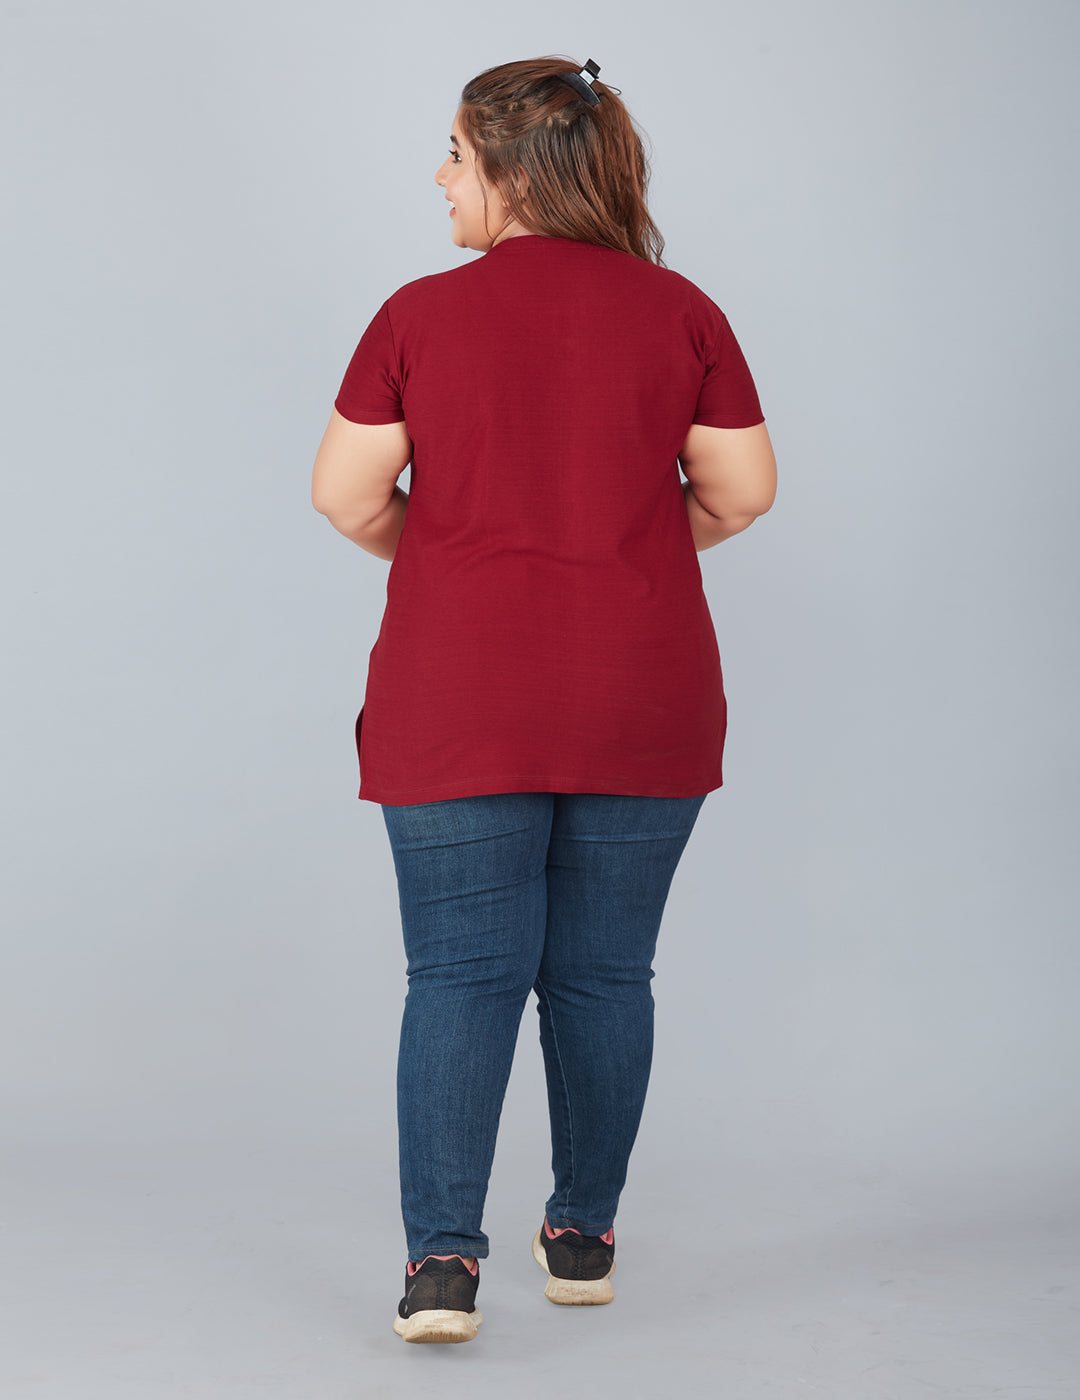 Plus Size Cotton T-shirts For Summer - Maroon